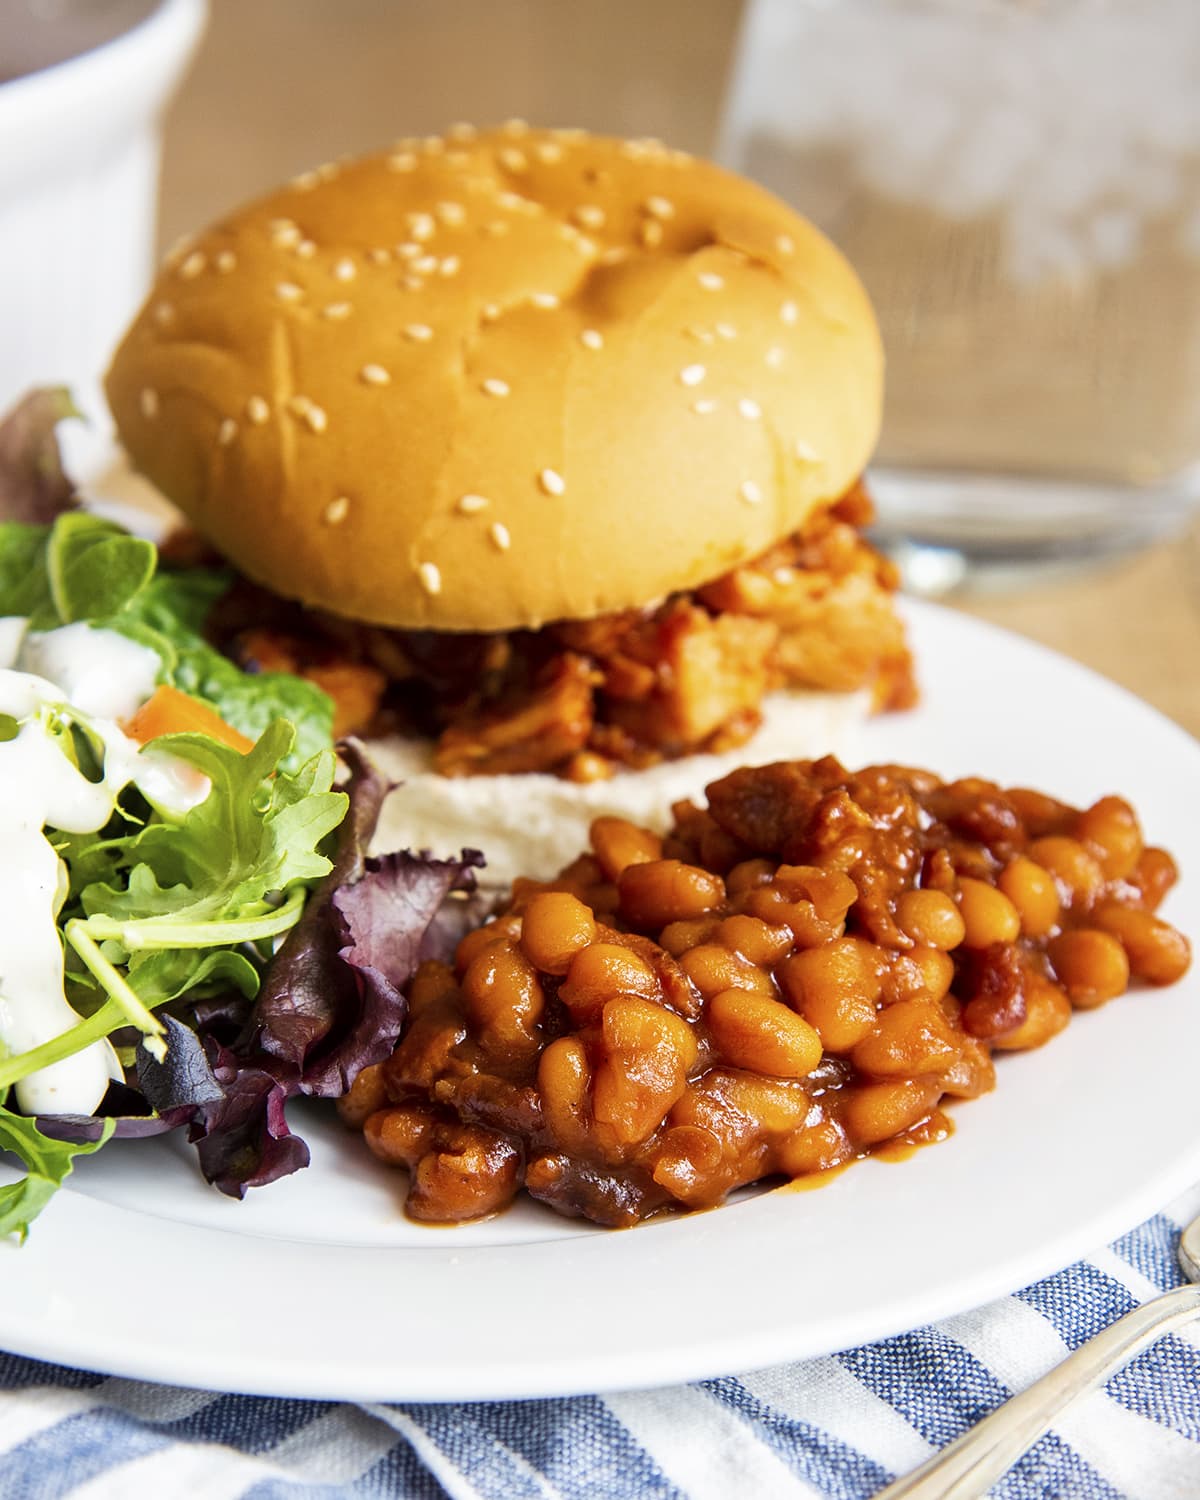 A plate with bbq beans, a bbq chicken sandwich, and salad.